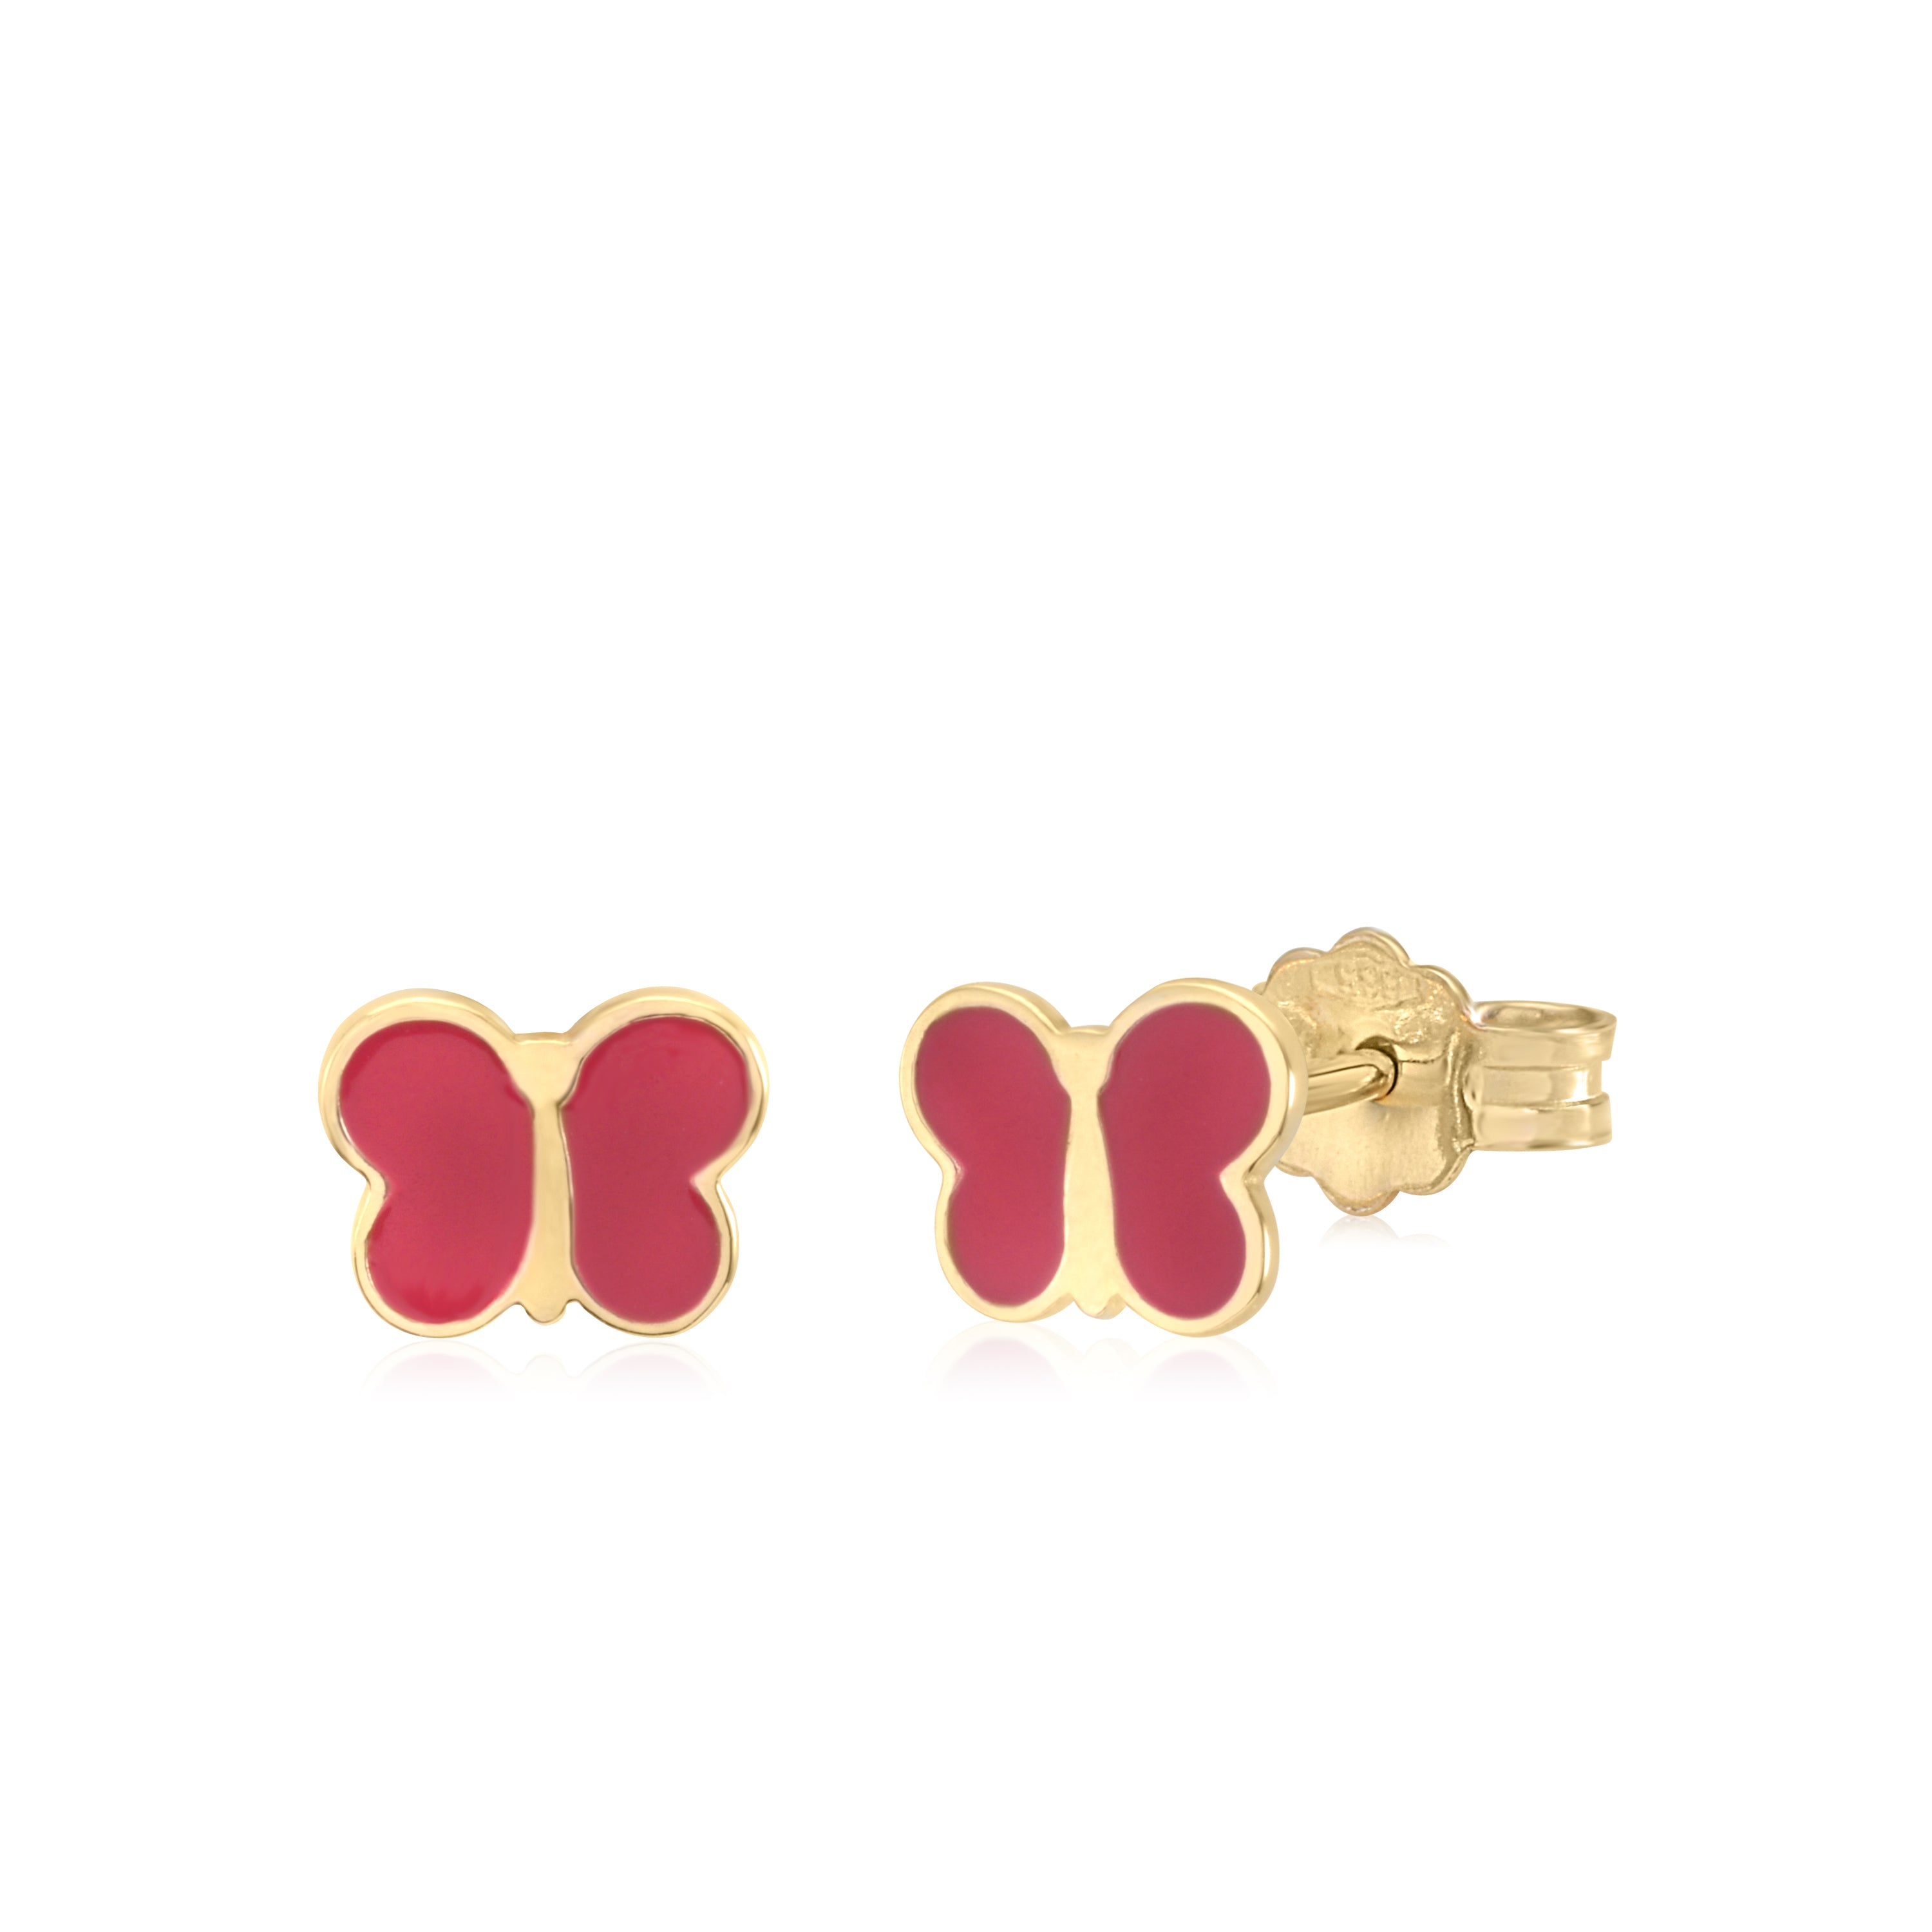 UNICORNJ 14K Yellow Gold Childrens Cute Post Stud Earrings with Enamel Italy